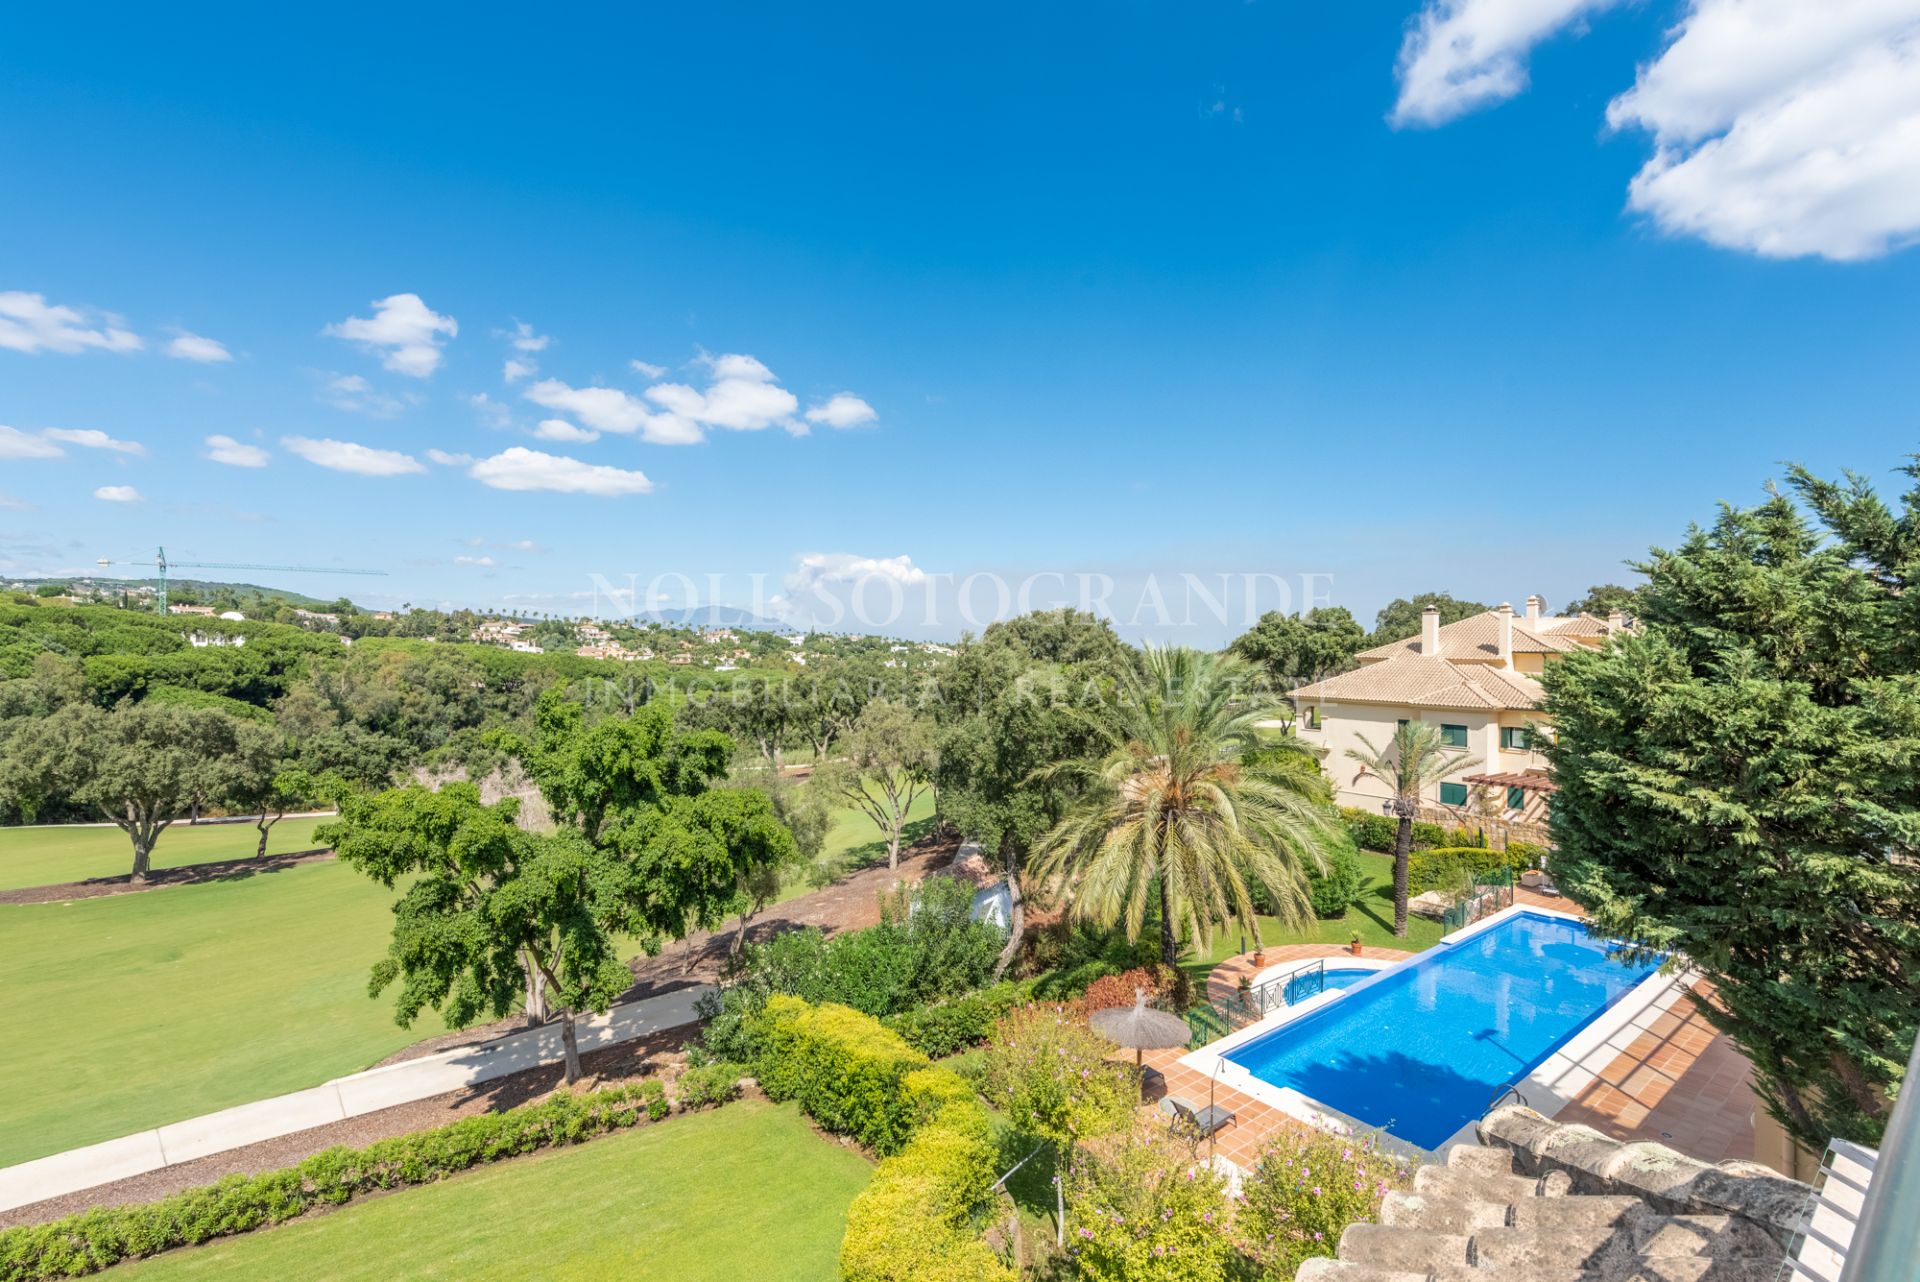 Fabulous penthouse front line to 15th fairway of the newly refurbished San Roque Old golf course.